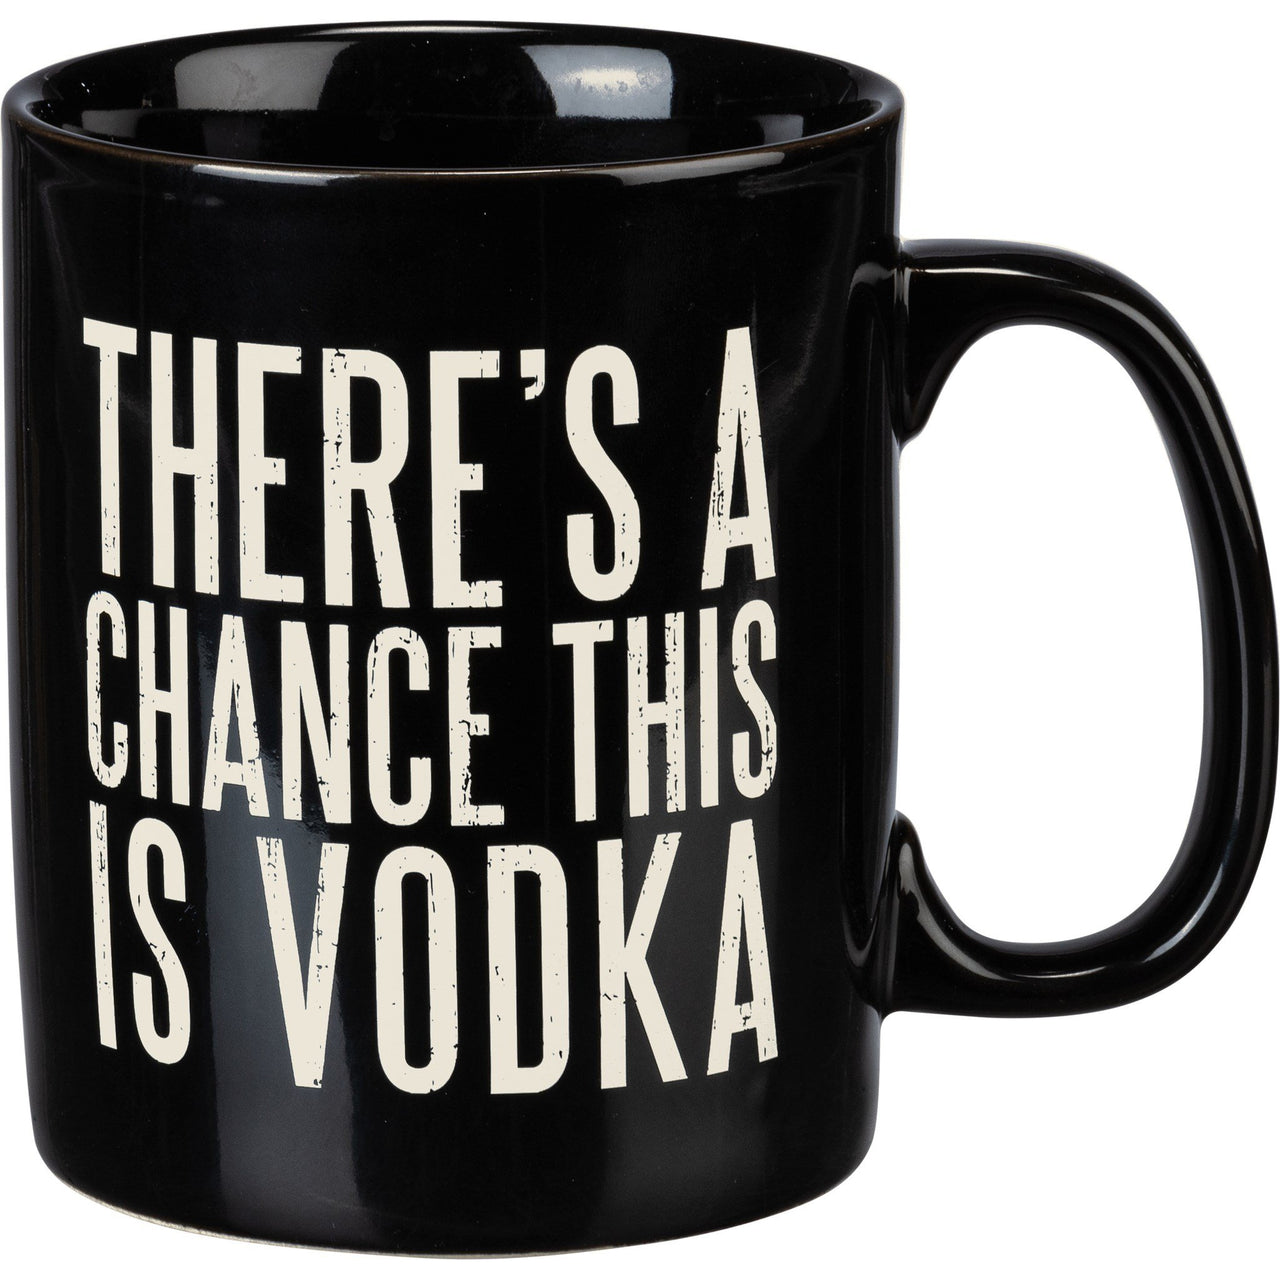 Mug - There's A Chance is Vodka